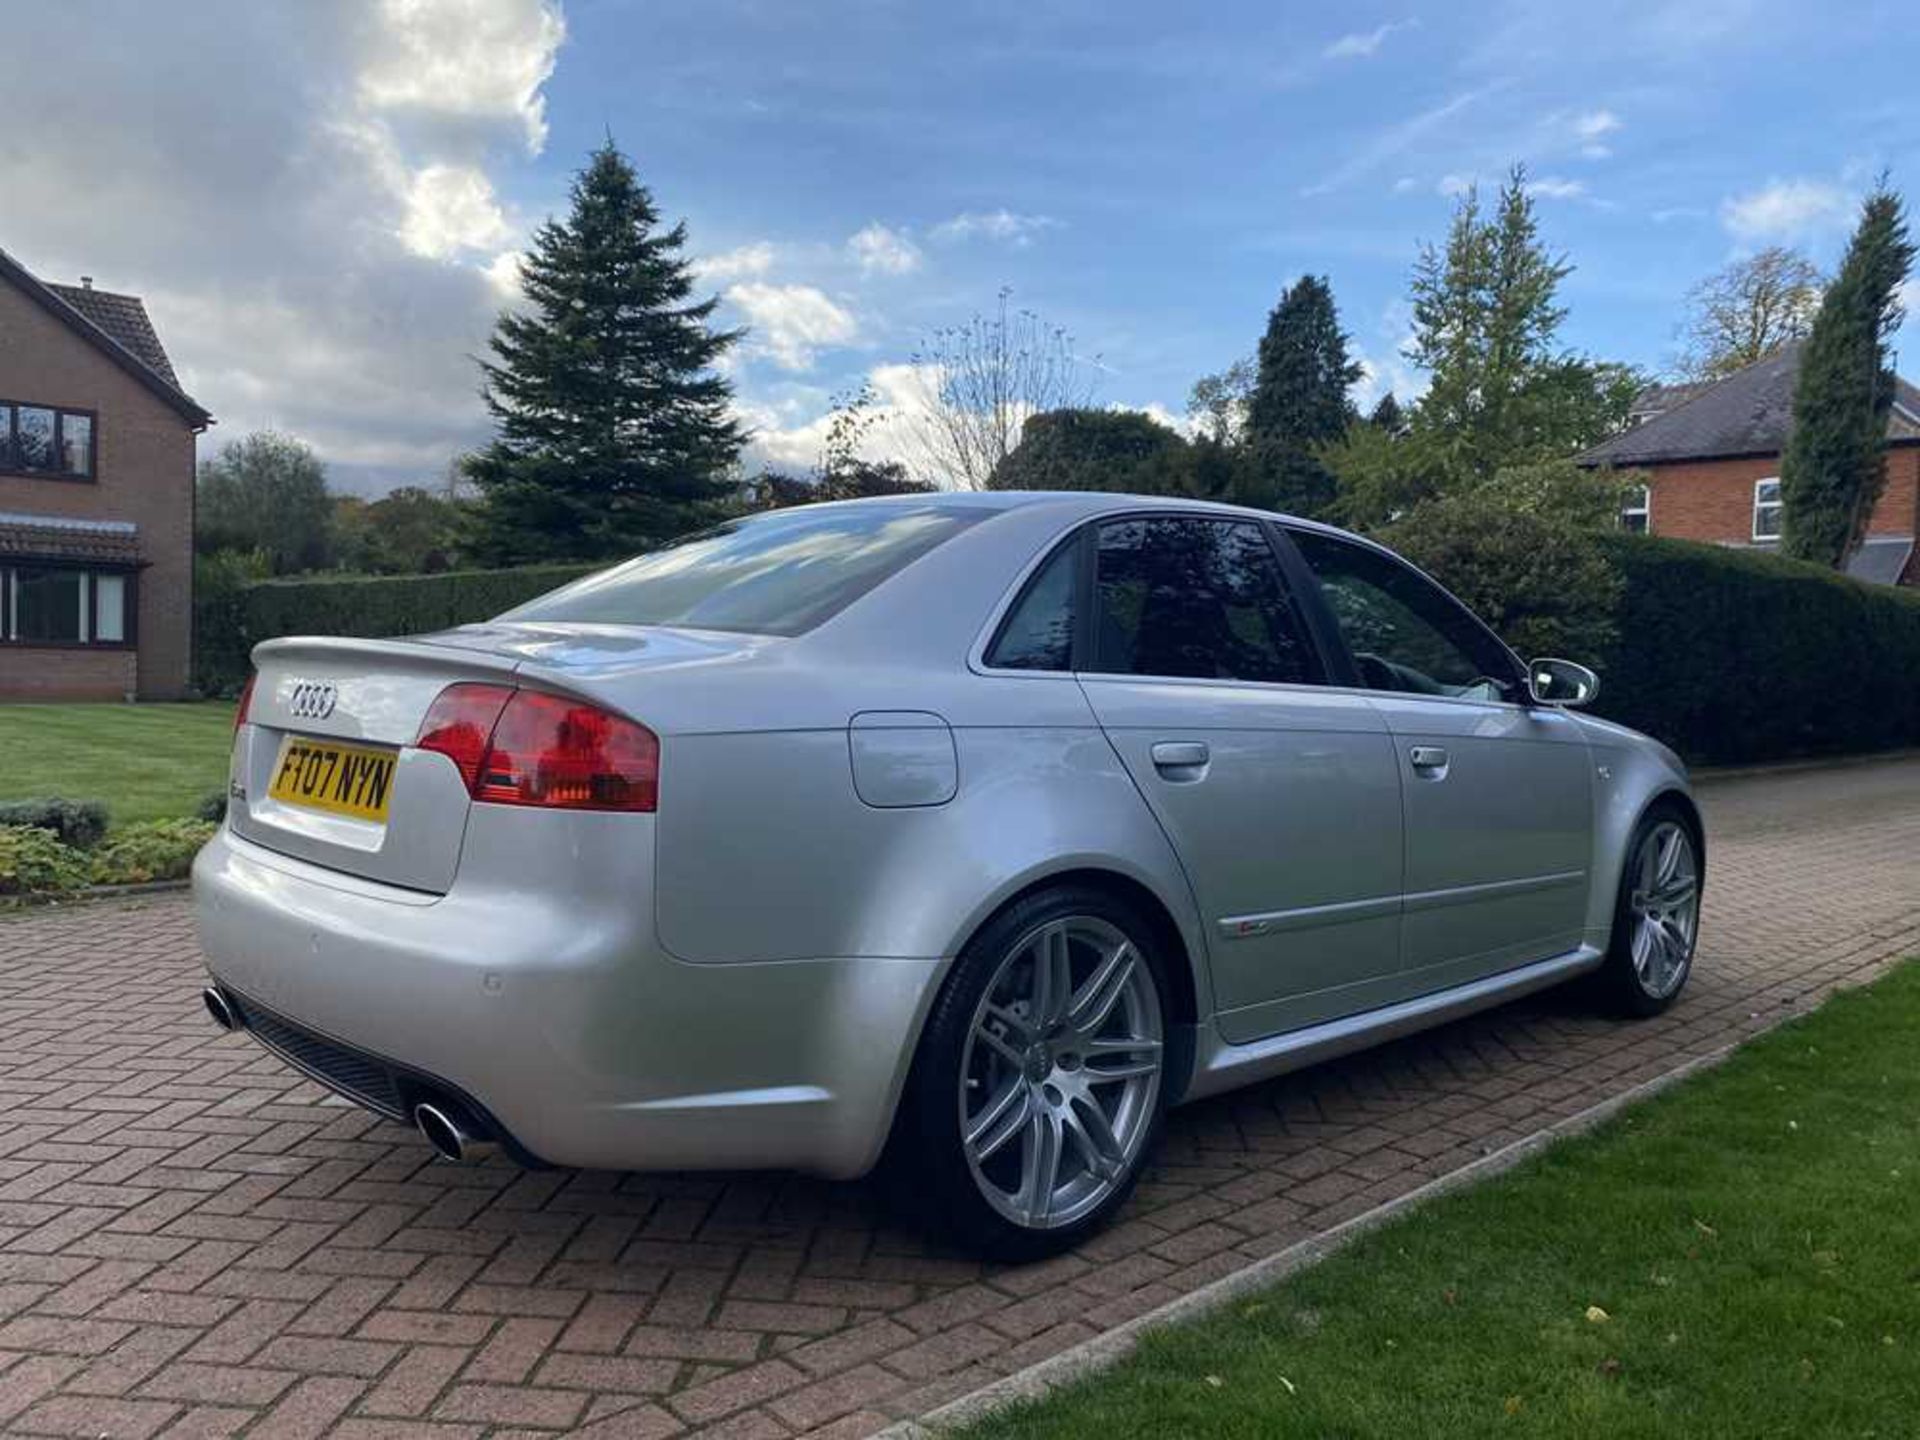 2007 Audi RS4 Saloon One owner and just c.60,000 miles from new - Image 20 of 86